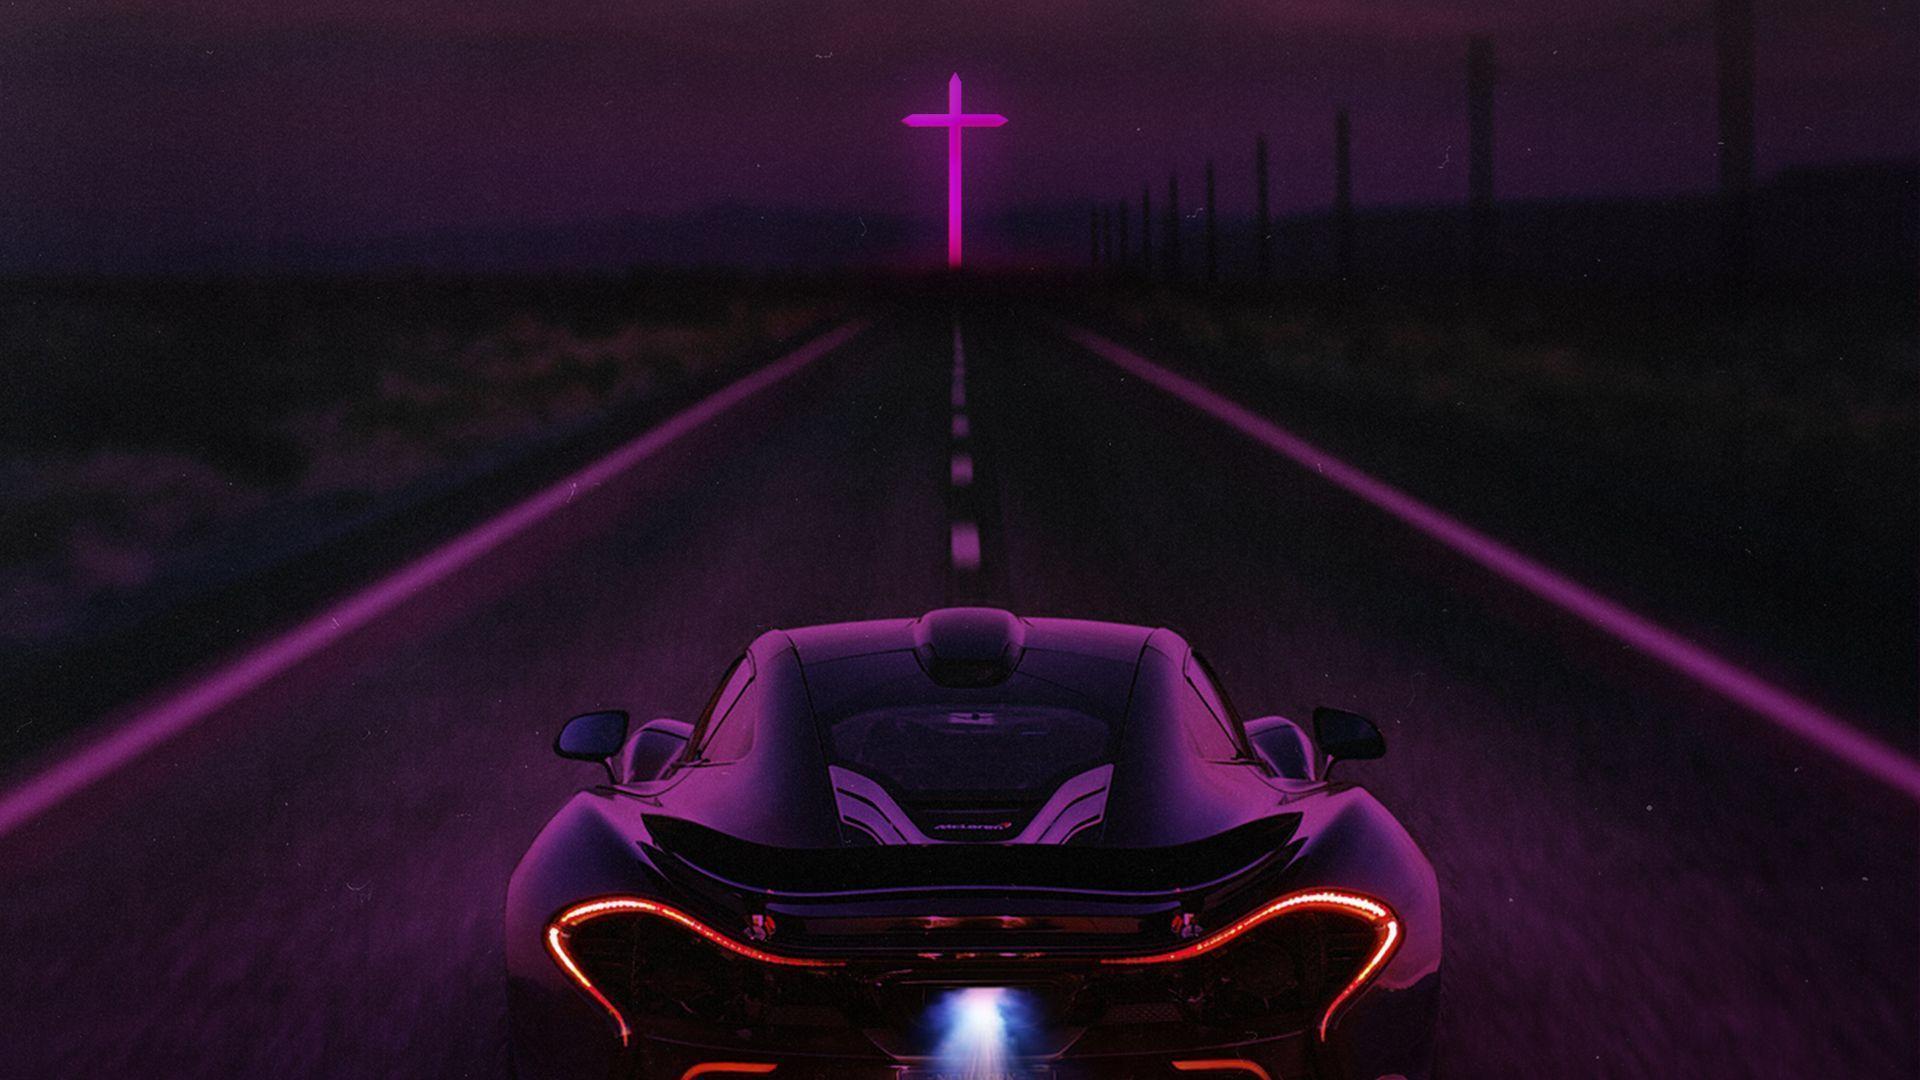 Made this wallpaper to go with The Weeknd's Starboy synthwave remix: outrun